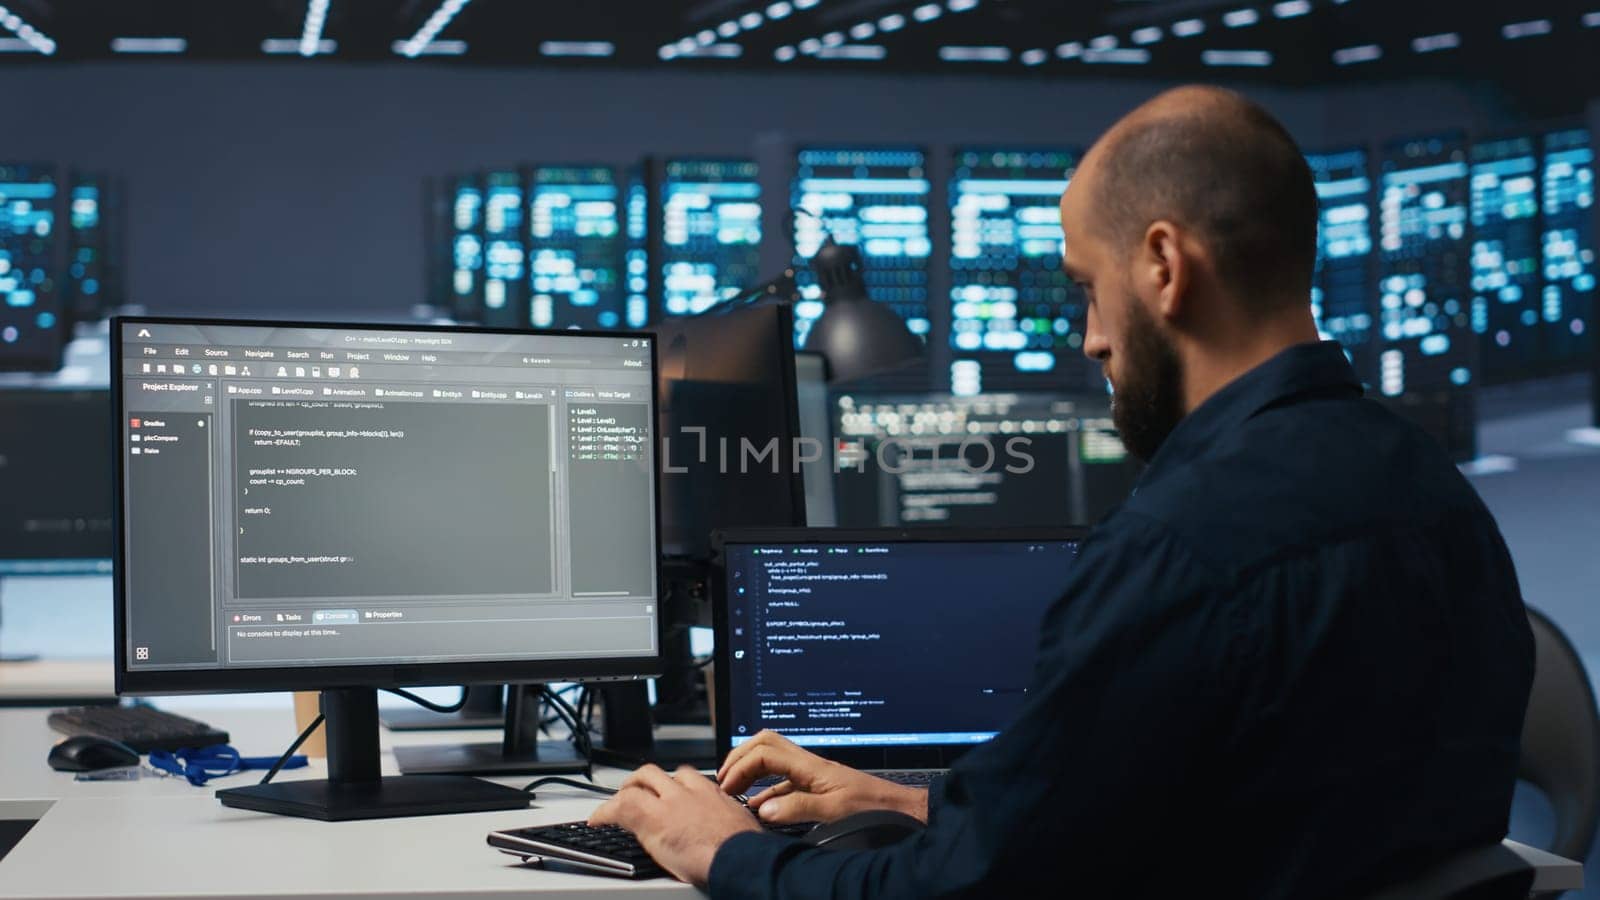 Developer typing code, working in network security data center facility, ensuring optimal performance. IT professional using desktop PC to monitor energy consumption across blade server clusters